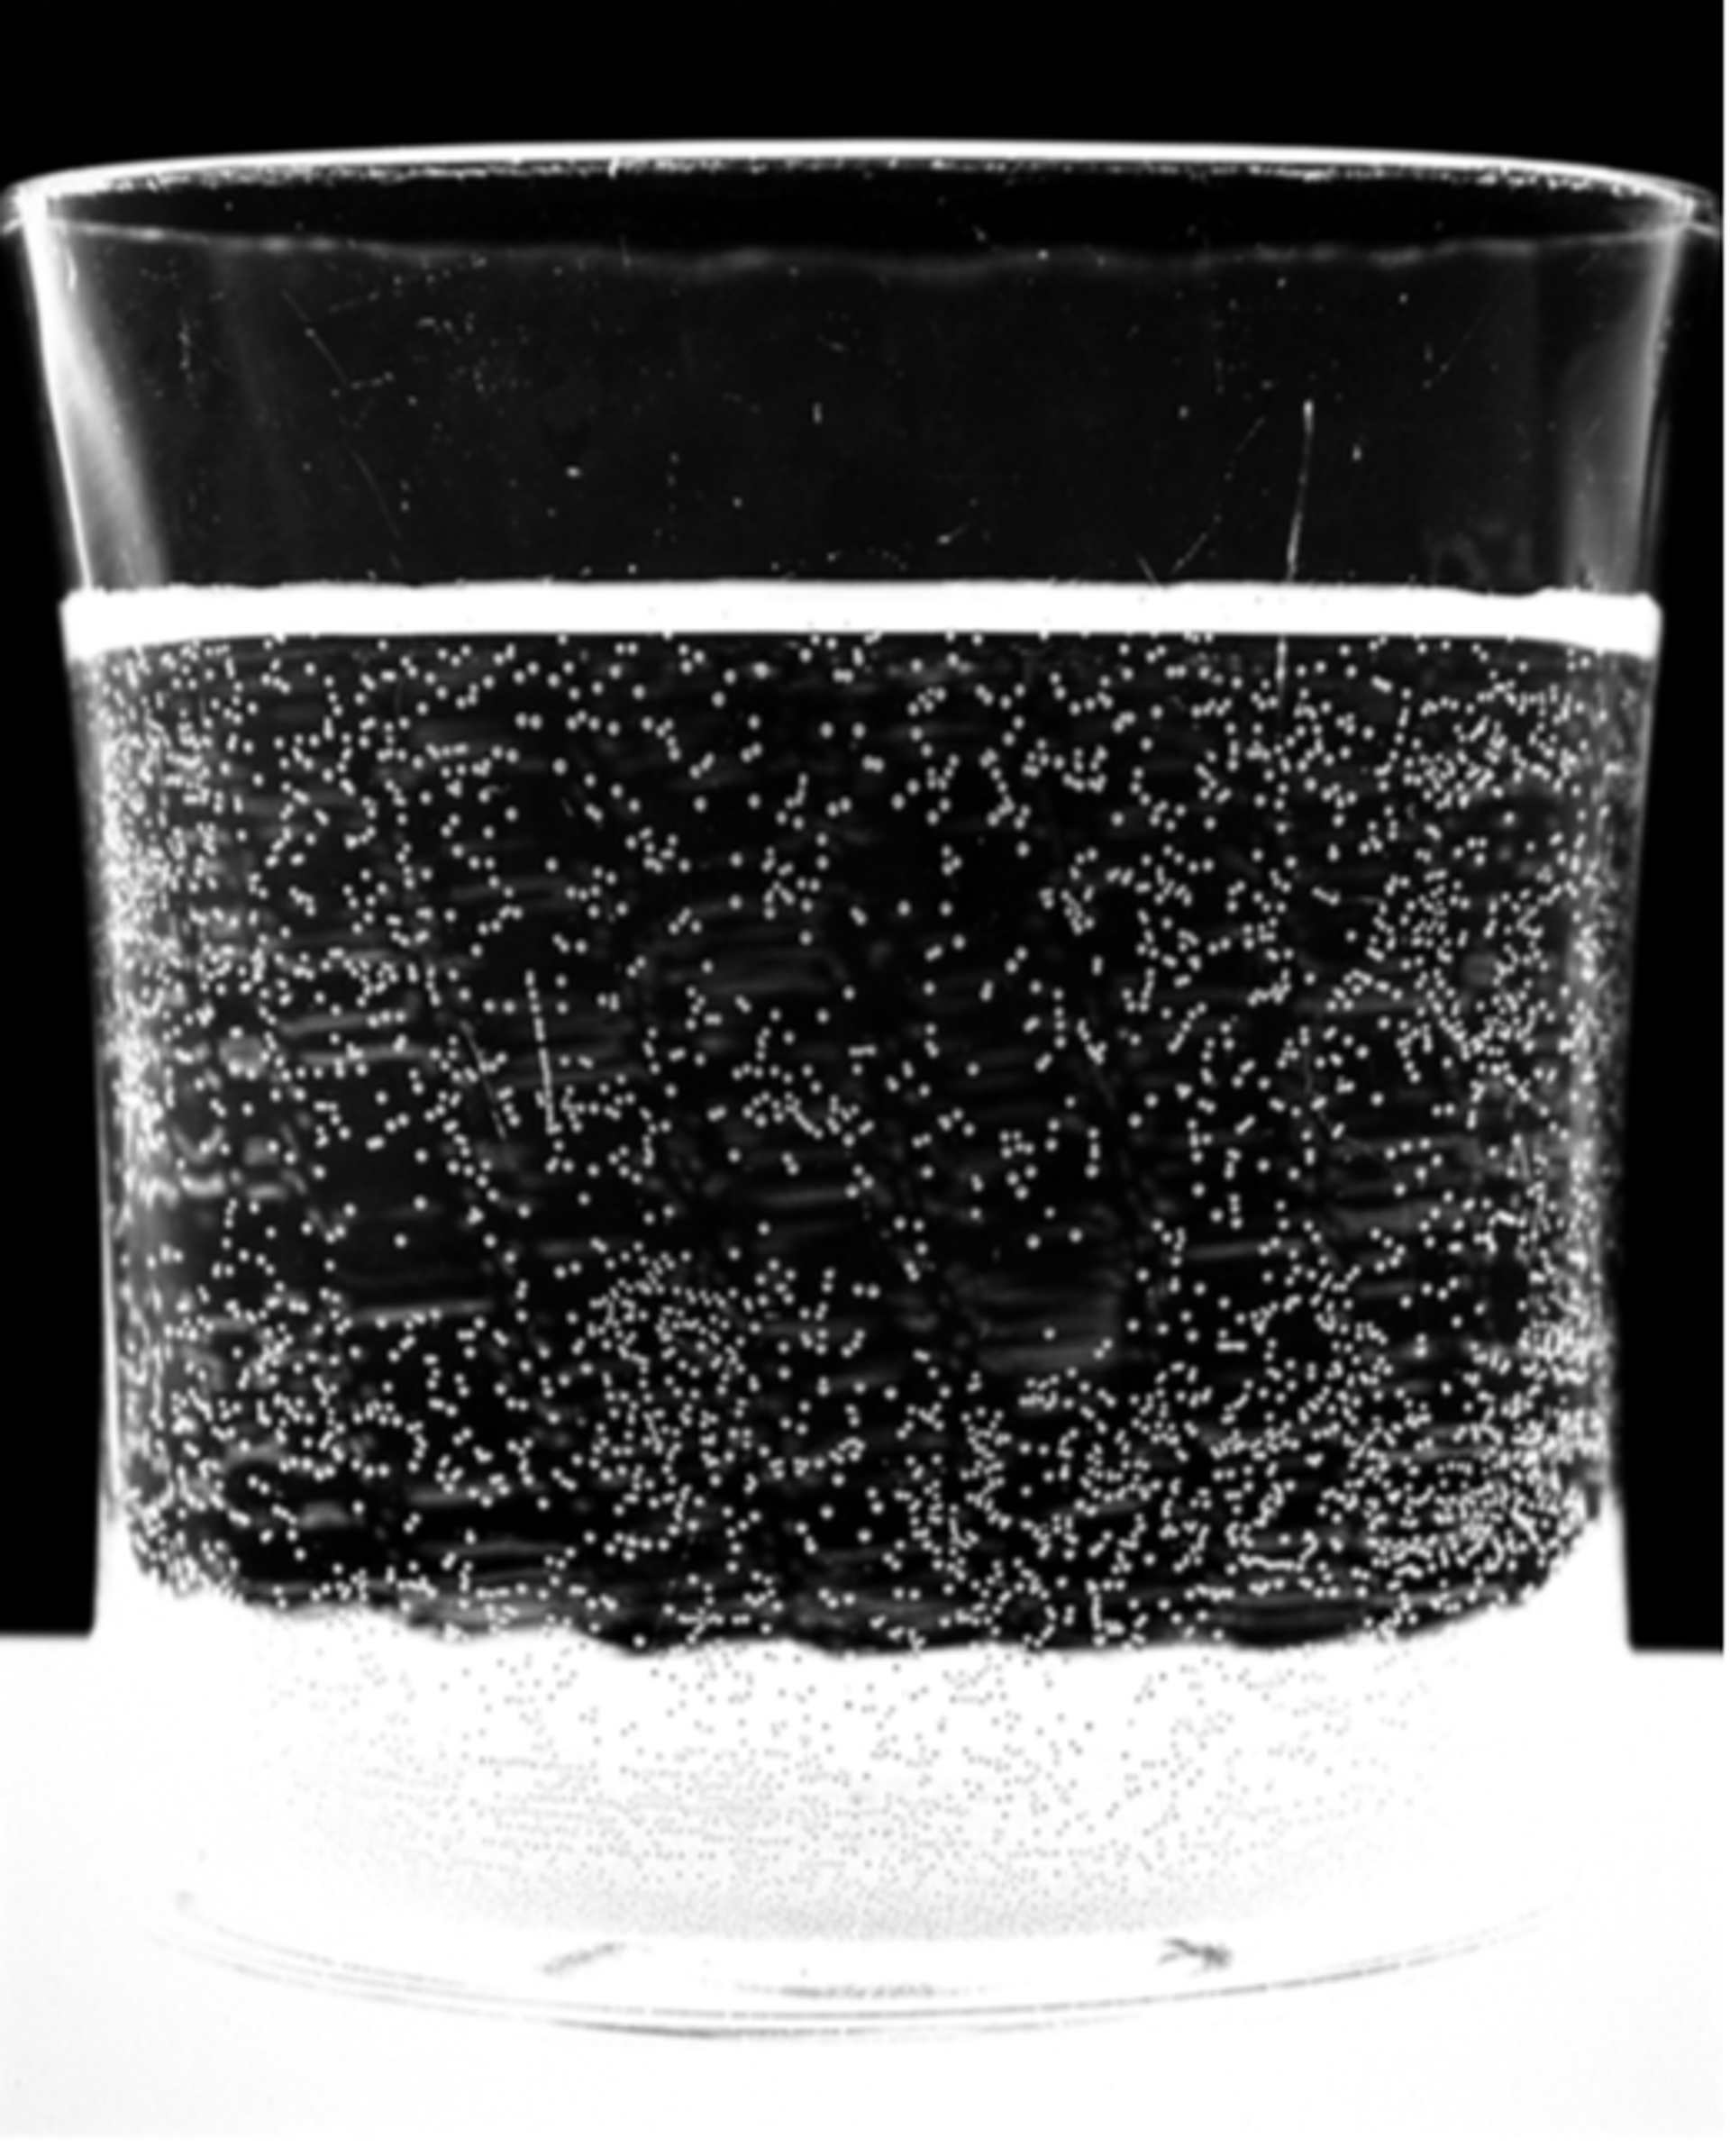 Water Glass 11 by Amanda Means